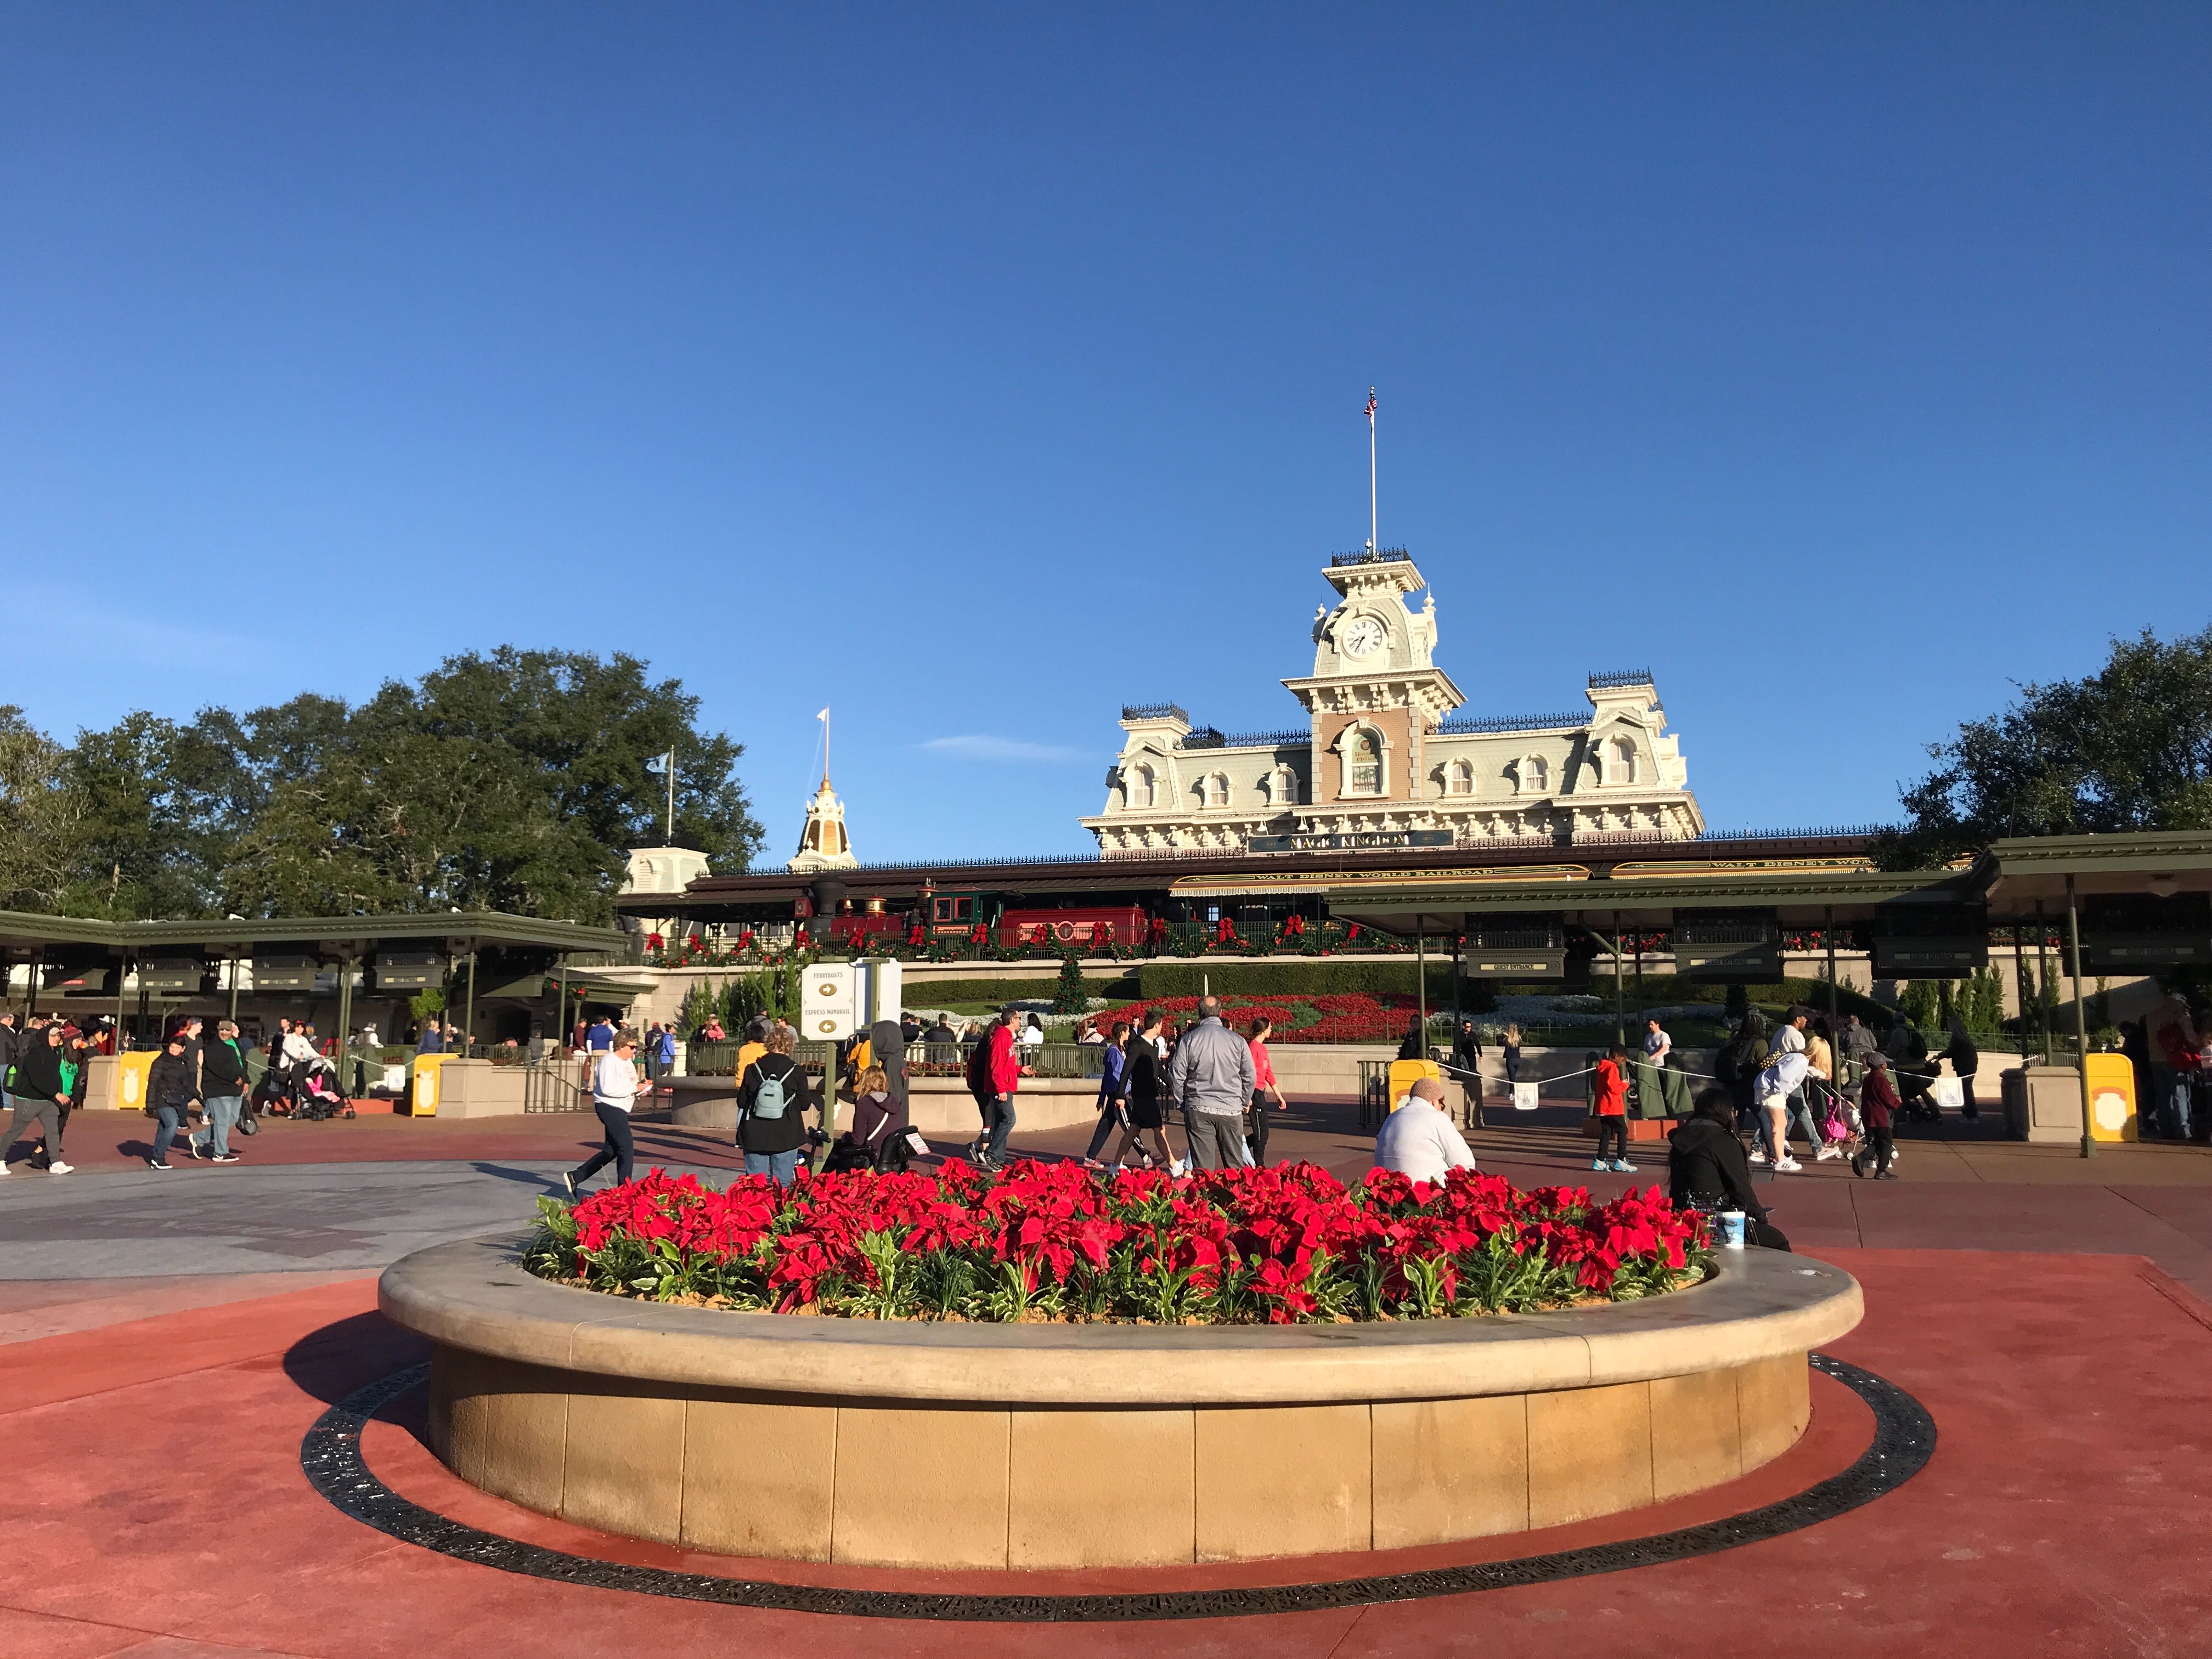 PHOTOS: Planters Emerge As Section of New Magic Kingdom Entrance Opens